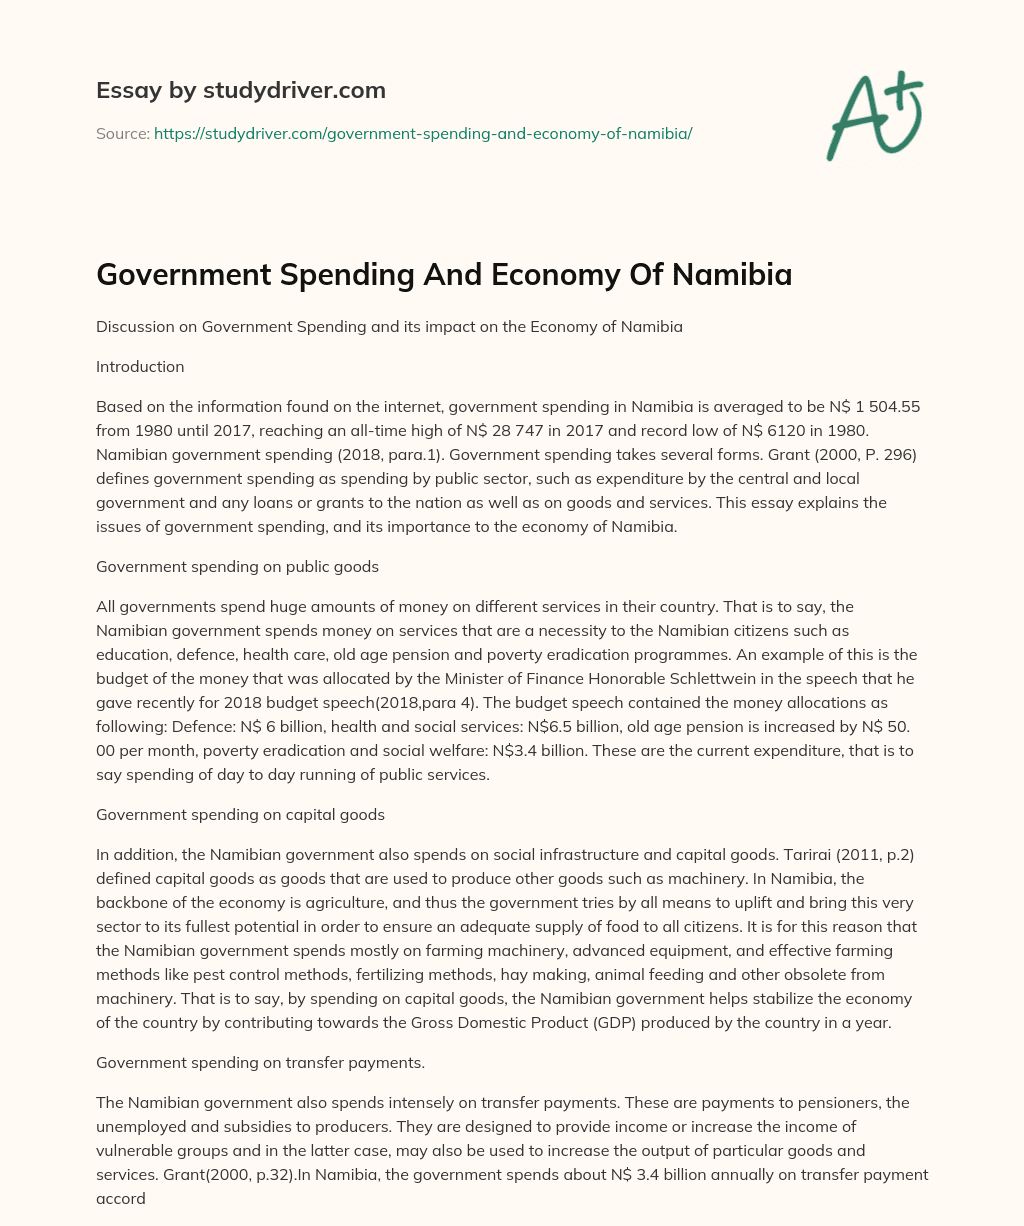 Government Spending and  Economy of Namibia essay